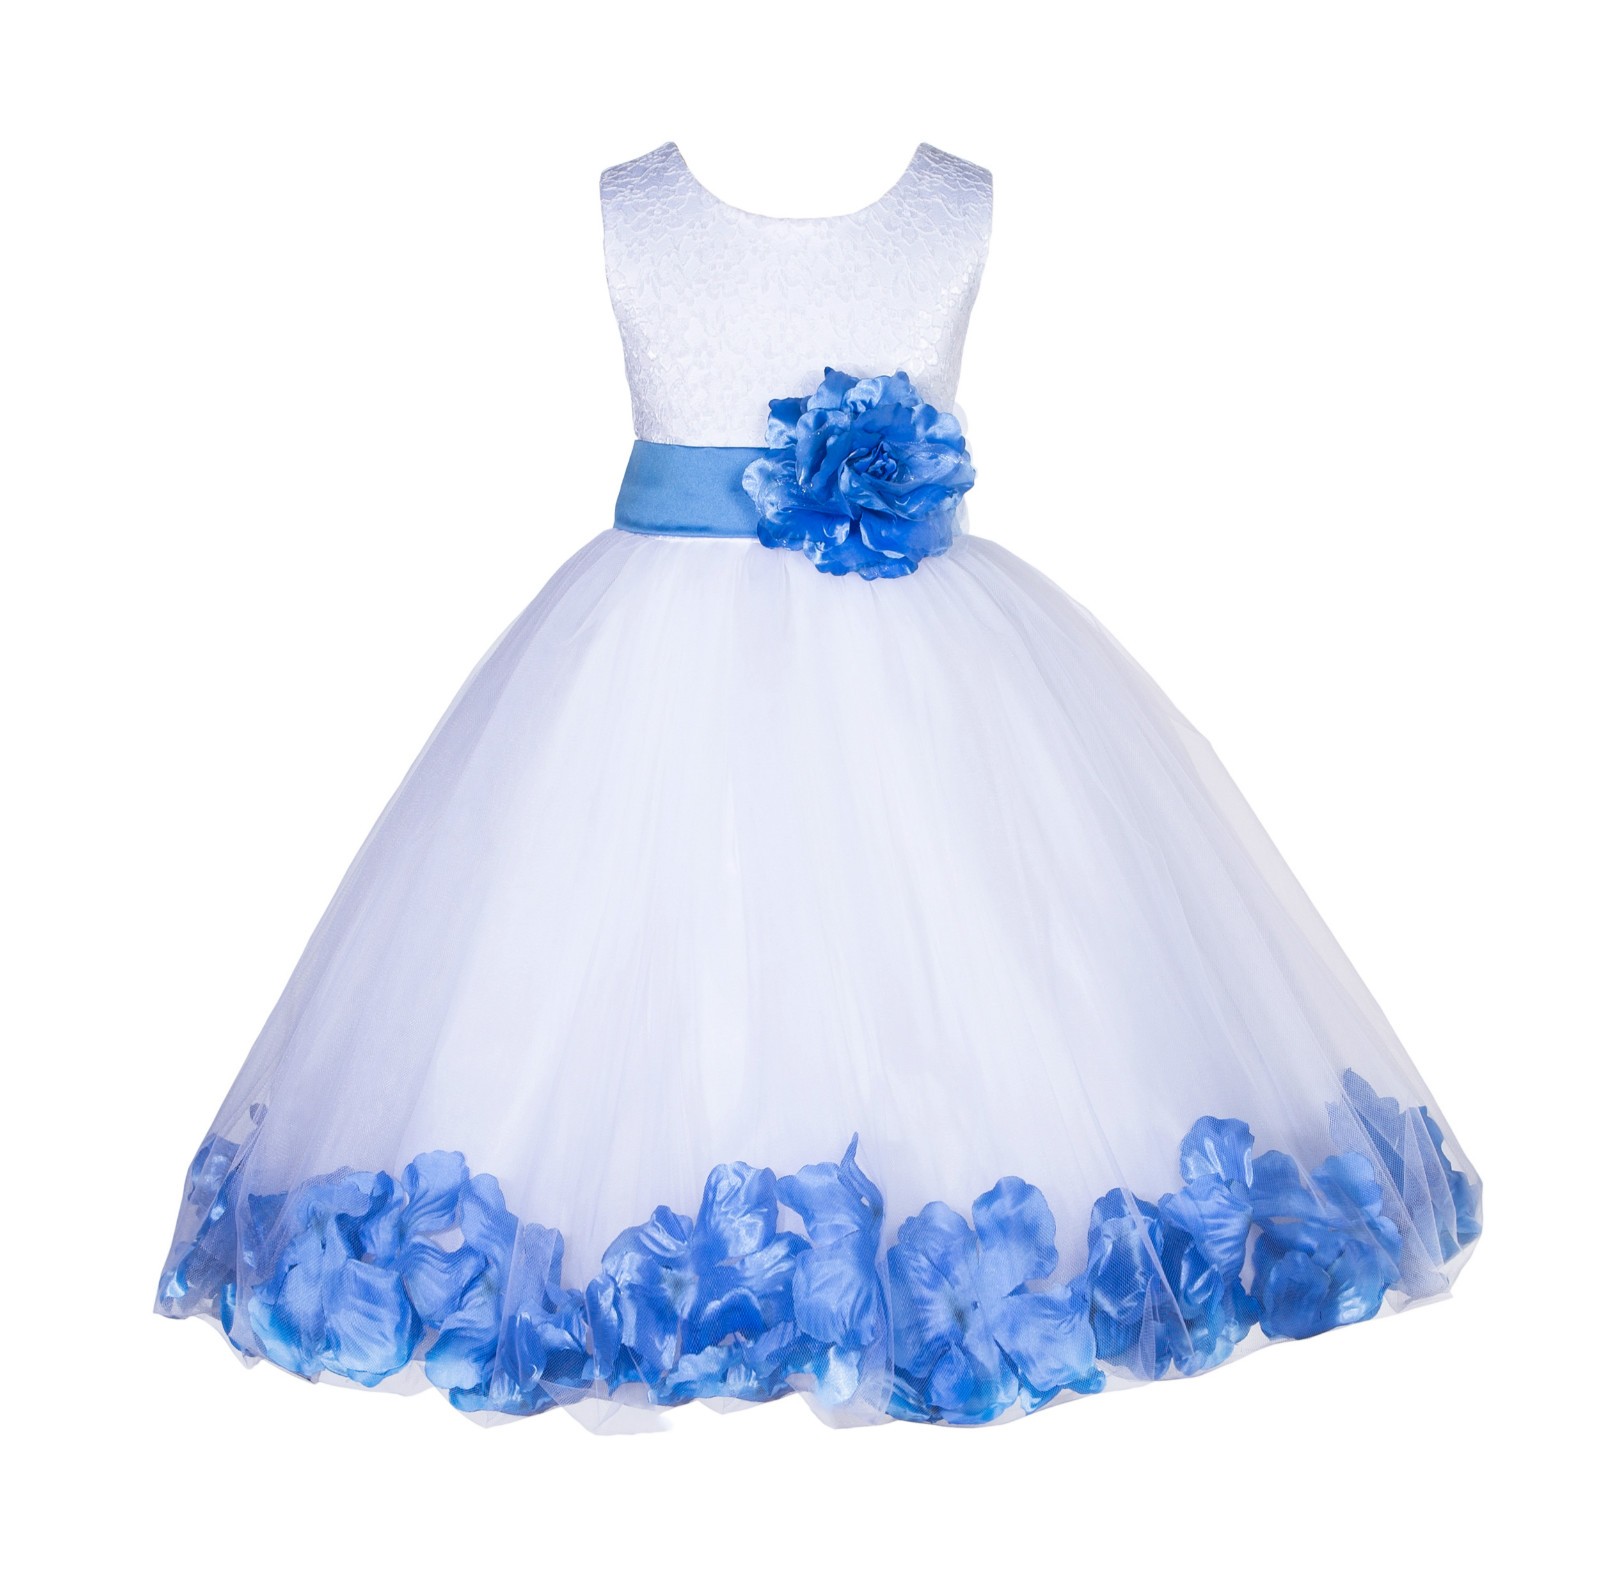 White/Corn flower Lace Top Tulle Floral Petals Flower Girl Dress 165S